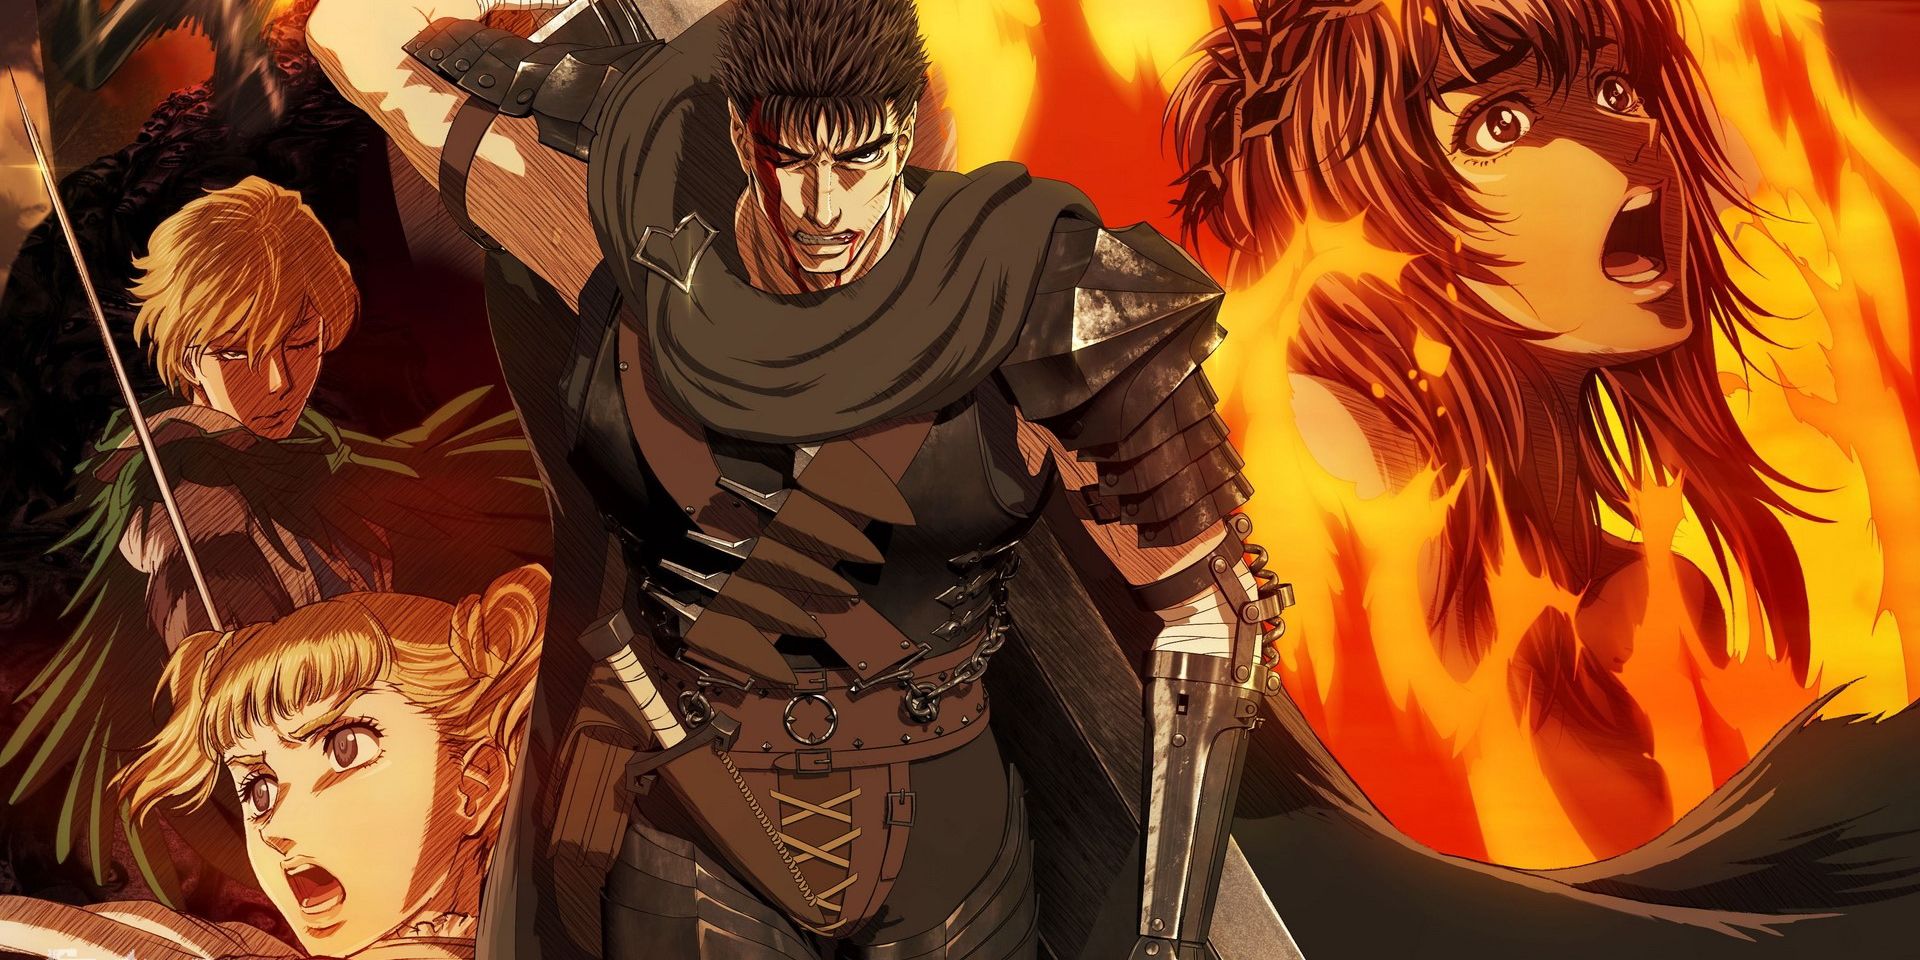 Guts and co in the Berserk Anime